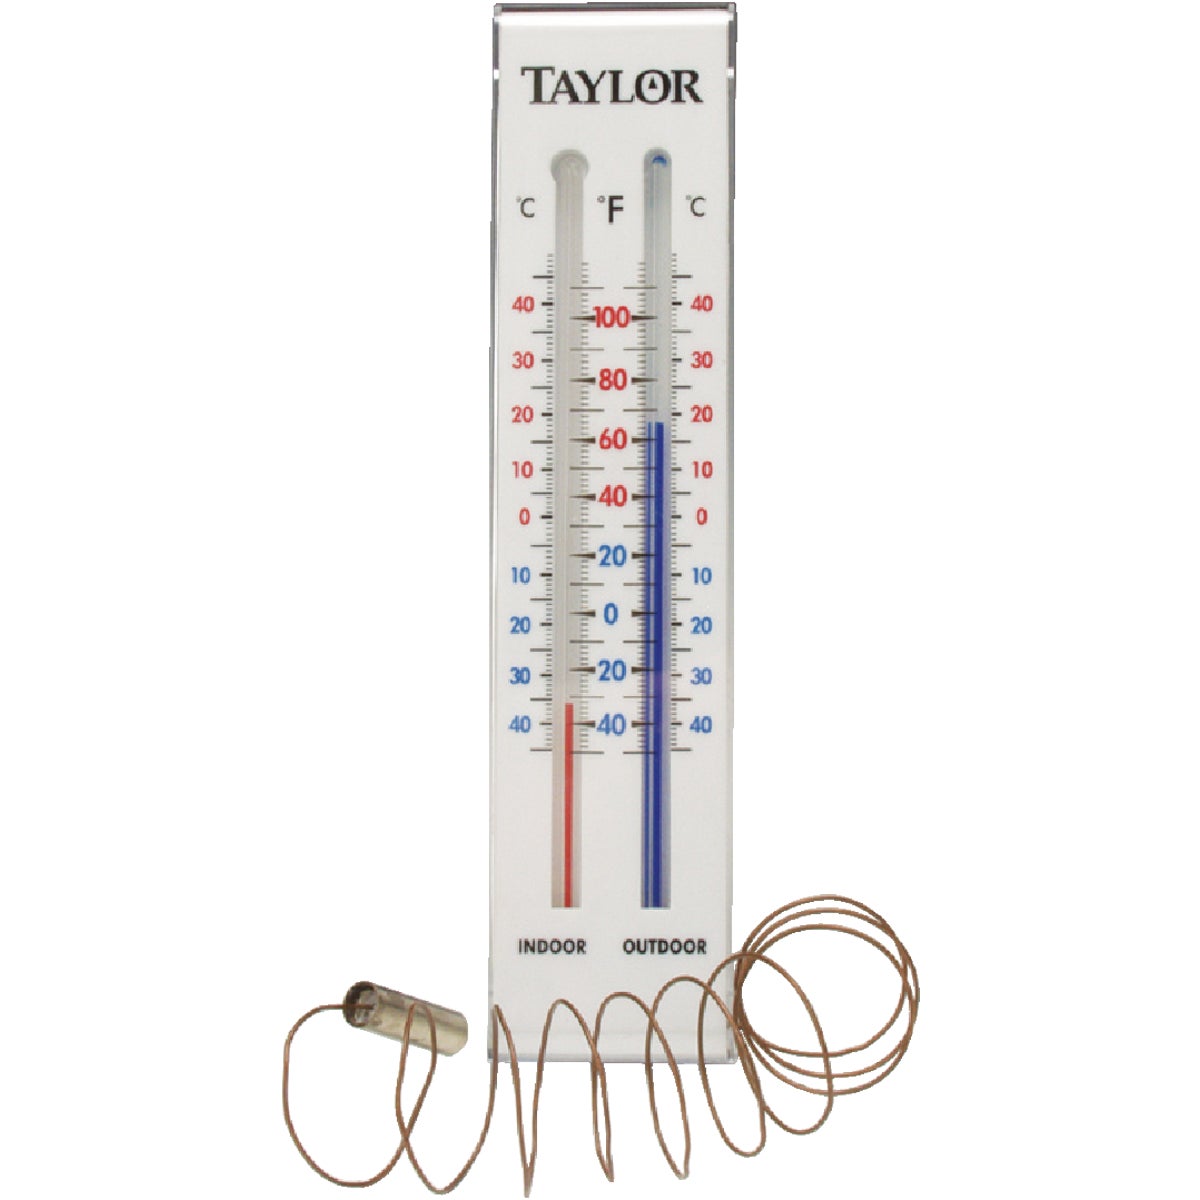 Item 624783, Read indoor and outdoor temperatures from inside with extended tubing.